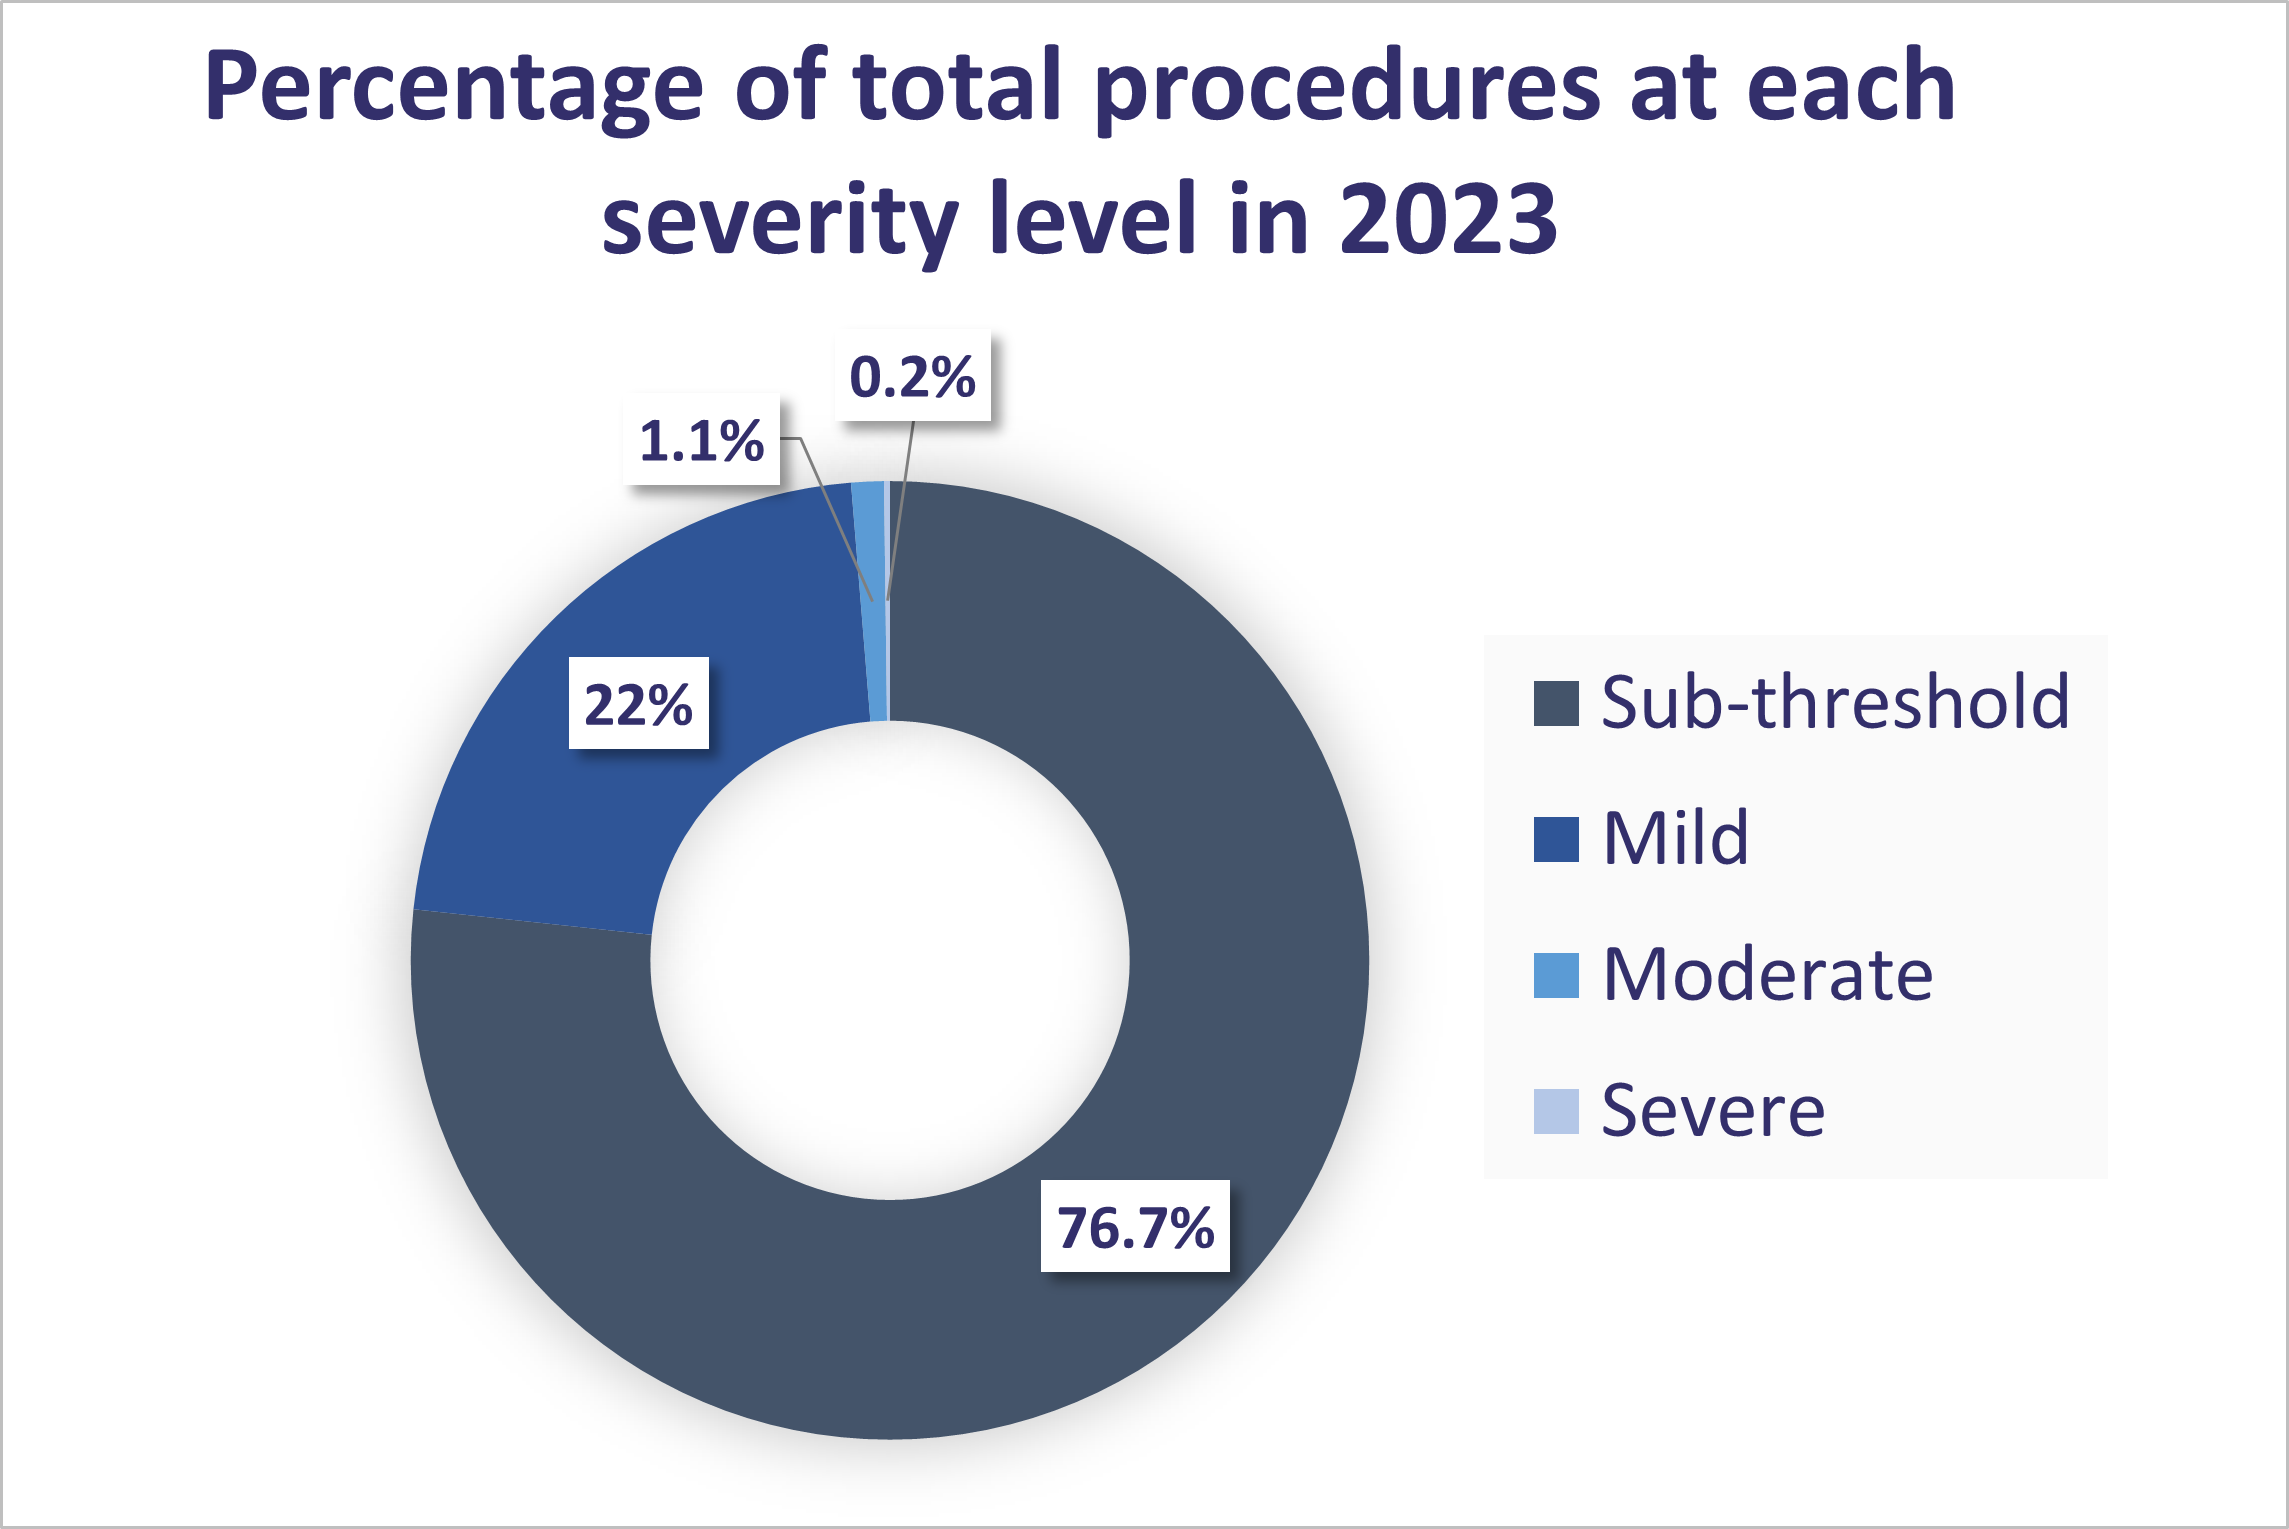 % of procedures in 2023 at each severity level shown in a pie chart: Mild 22.0%, Moderate 1.1%, Severe 0.2%, Sub-threshold 76.7%, Non-recovery 0%